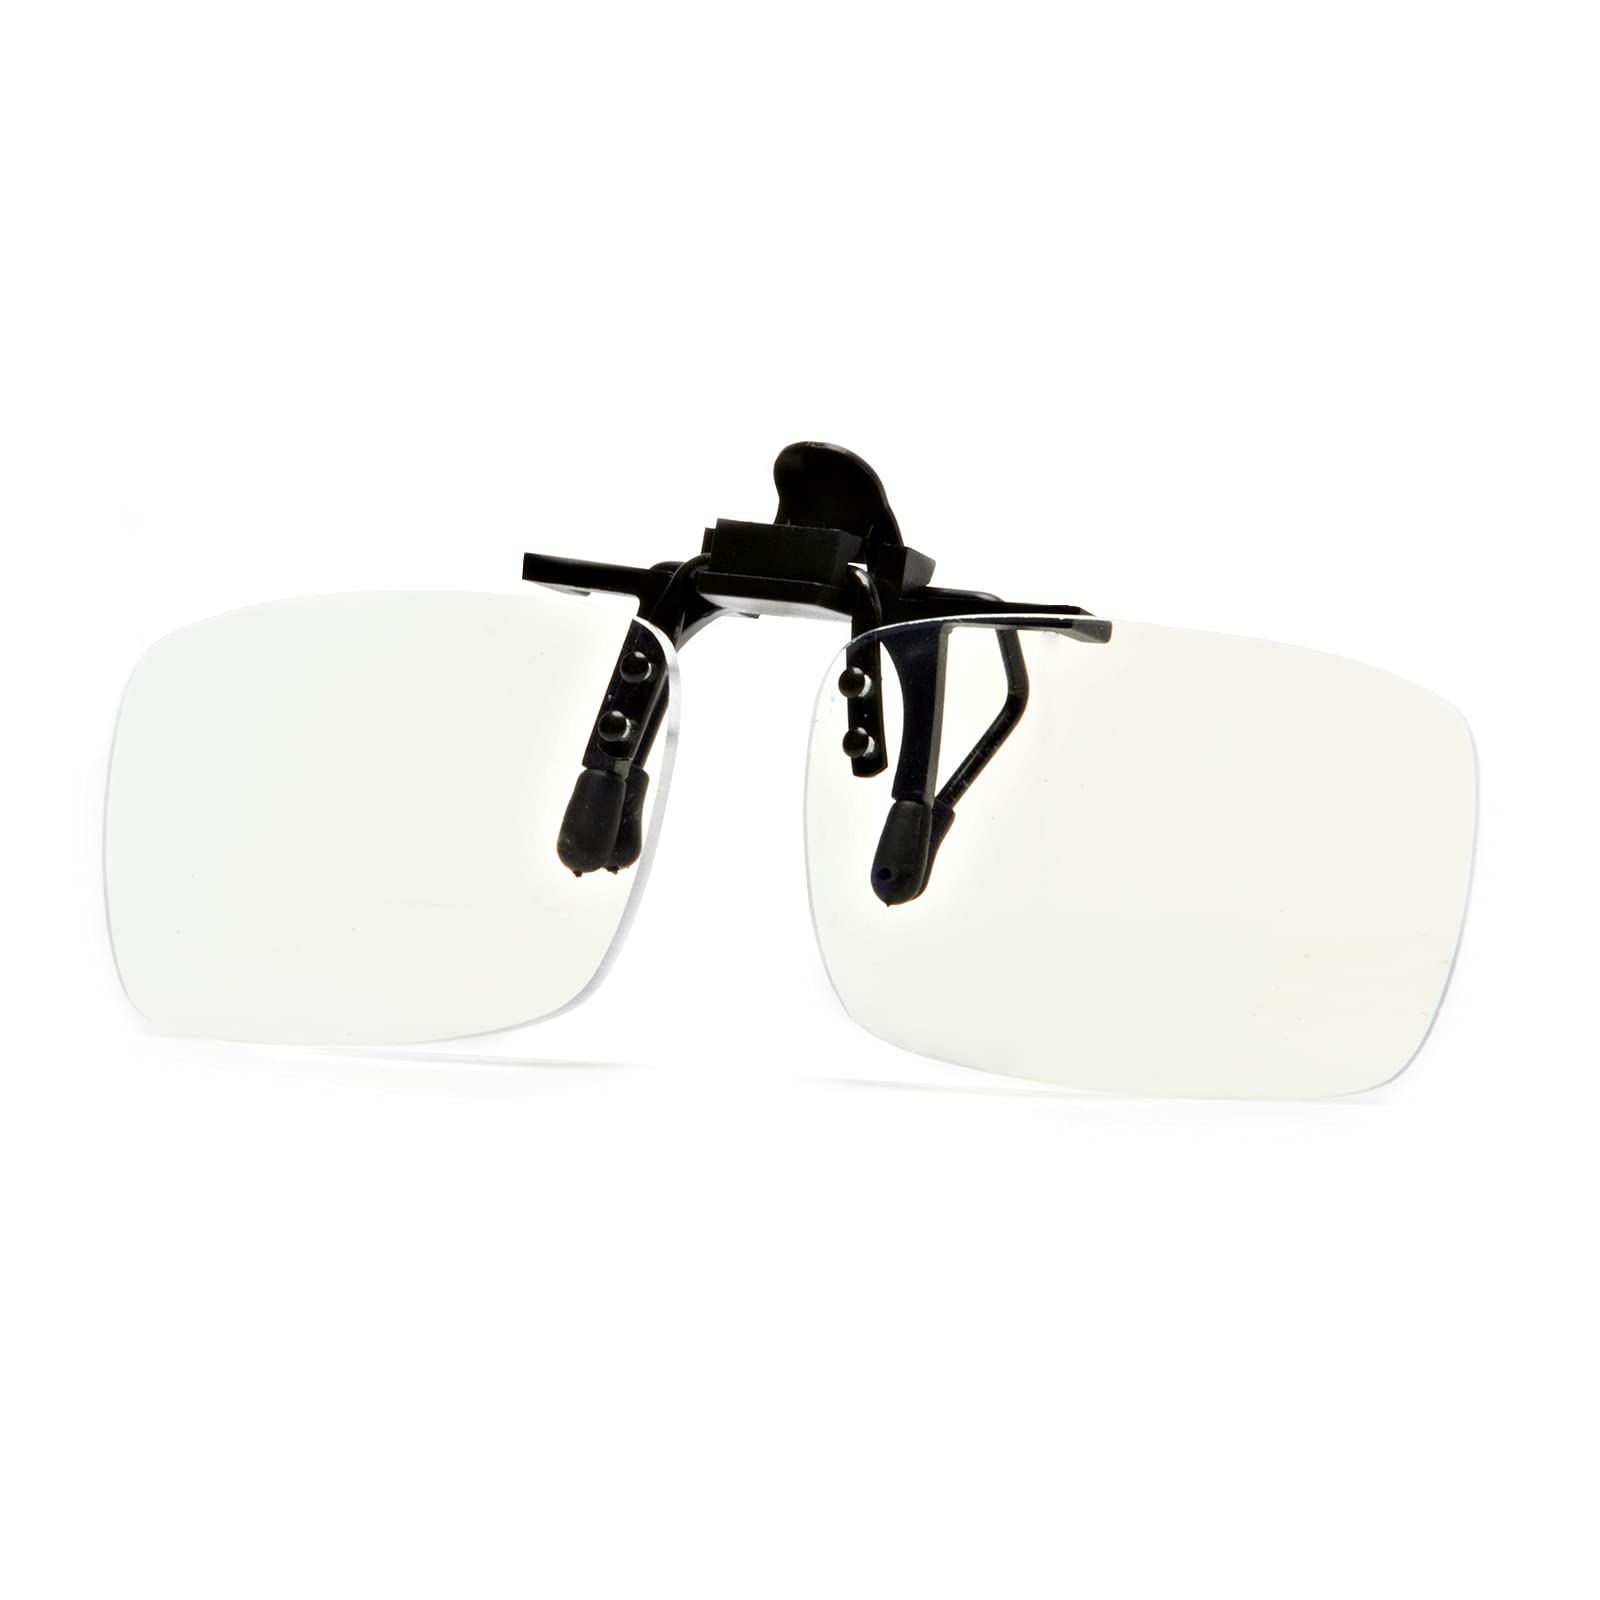 Clip On Reading Glasses 3.0, Readers Magnifiers India